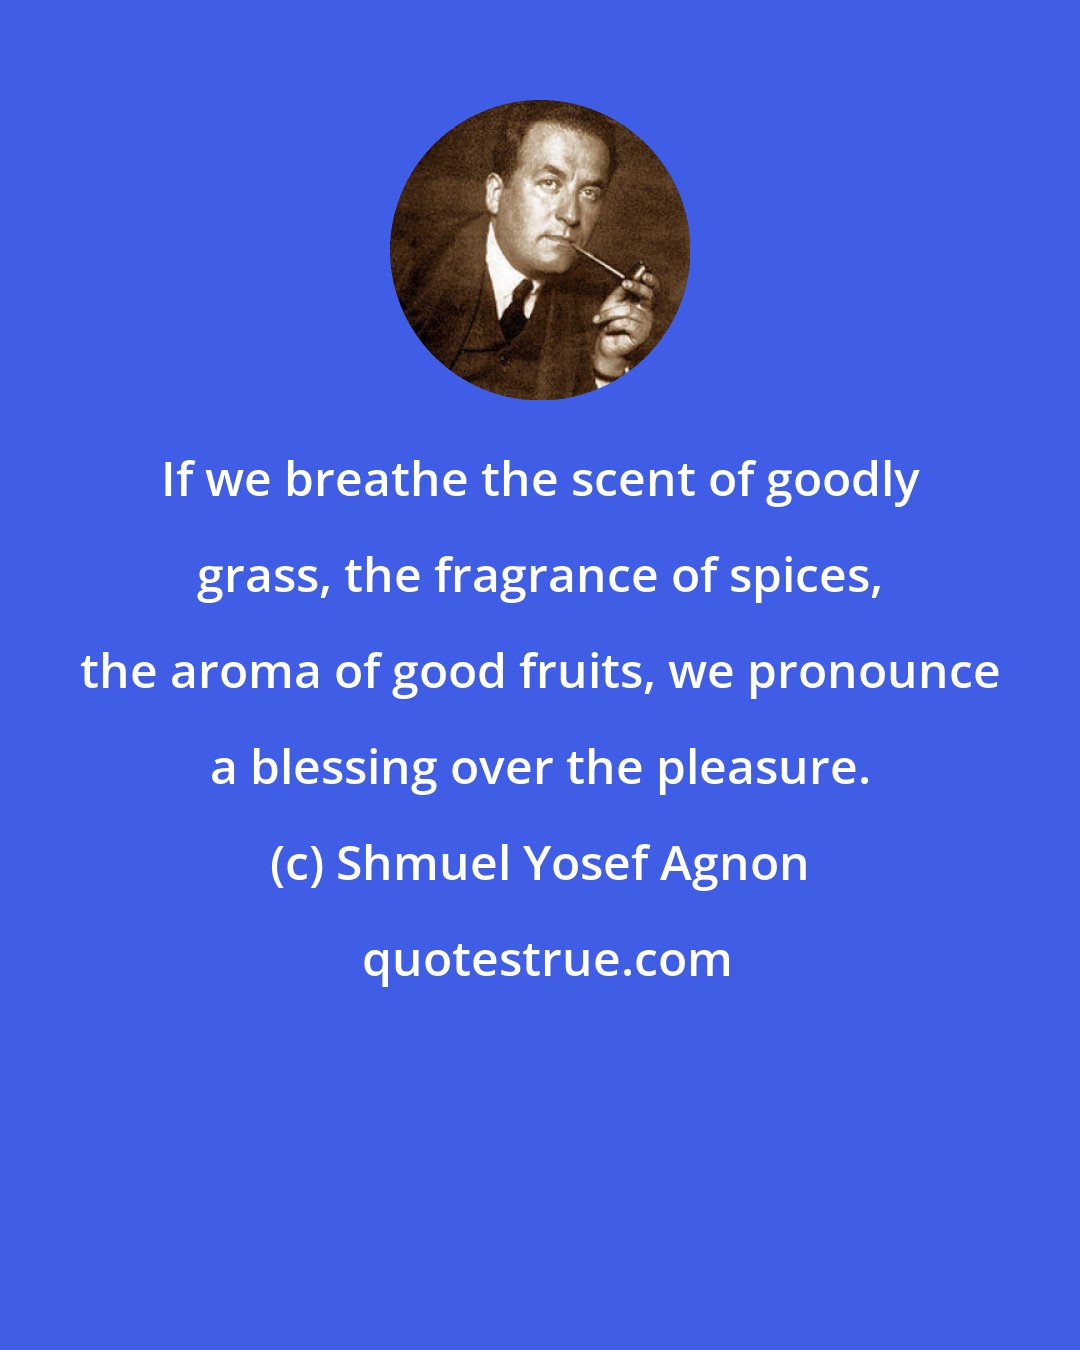 Shmuel Yosef Agnon: If we breathe the scent of goodly grass, the fragrance of spices, the aroma of good fruits, we pronounce a blessing over the pleasure.